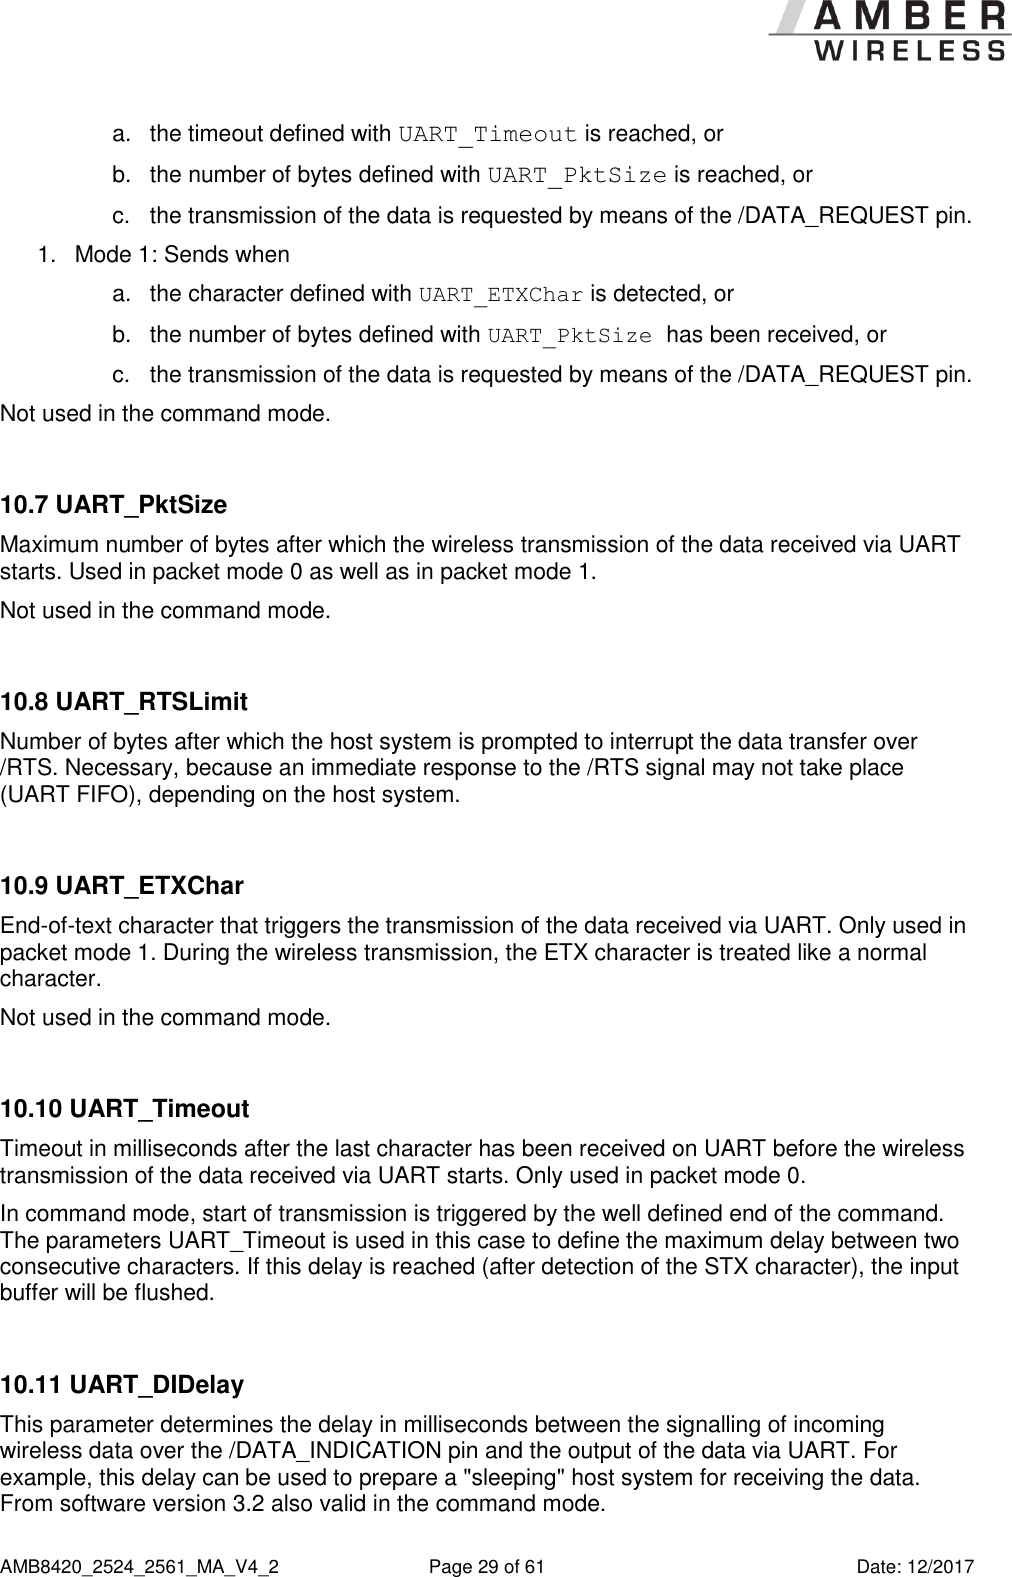      AMB8420_2524_2561_MA_V4_2  Page 29 of 61  Date: 12/2017 a.  the timeout defined with UART_Timeout is reached, or b.  the number of bytes defined with UART_PktSize is reached, or c.  the transmission of the data is requested by means of the /DATA_REQUEST pin. 1.  Mode 1: Sends when a.  the character defined with UART_ETXChar is detected, or b.  the number of bytes defined with UART_PktSize has been received, or c.  the transmission of the data is requested by means of the /DATA_REQUEST pin. Not used in the command mode.  10.7 UART_PktSize Maximum number of bytes after which the wireless transmission of the data received via UART starts. Used in packet mode 0 as well as in packet mode 1. Not used in the command mode.  10.8 UART_RTSLimit Number of bytes after which the host system is prompted to interrupt the data transfer over /RTS. Necessary, because an immediate response to the /RTS signal may not take place (UART FIFO), depending on the host system.  10.9 UART_ETXChar End-of-text character that triggers the transmission of the data received via UART. Only used in packet mode 1. During the wireless transmission, the ETX character is treated like a normal character. Not used in the command mode.  10.10 UART_Timeout Timeout in milliseconds after the last character has been received on UART before the wireless transmission of the data received via UART starts. Only used in packet mode 0. In command mode, start of transmission is triggered by the well defined end of the command. The parameters UART_Timeout is used in this case to define the maximum delay between two consecutive characters. If this delay is reached (after detection of the STX character), the input buffer will be flushed.  10.11 UART_DIDelay This parameter determines the delay in milliseconds between the signalling of incoming wireless data over the /DATA_INDICATION pin and the output of the data via UART. For example, this delay can be used to prepare a &quot;sleeping&quot; host system for receiving the data. From software version 3.2 also valid in the command mode. 